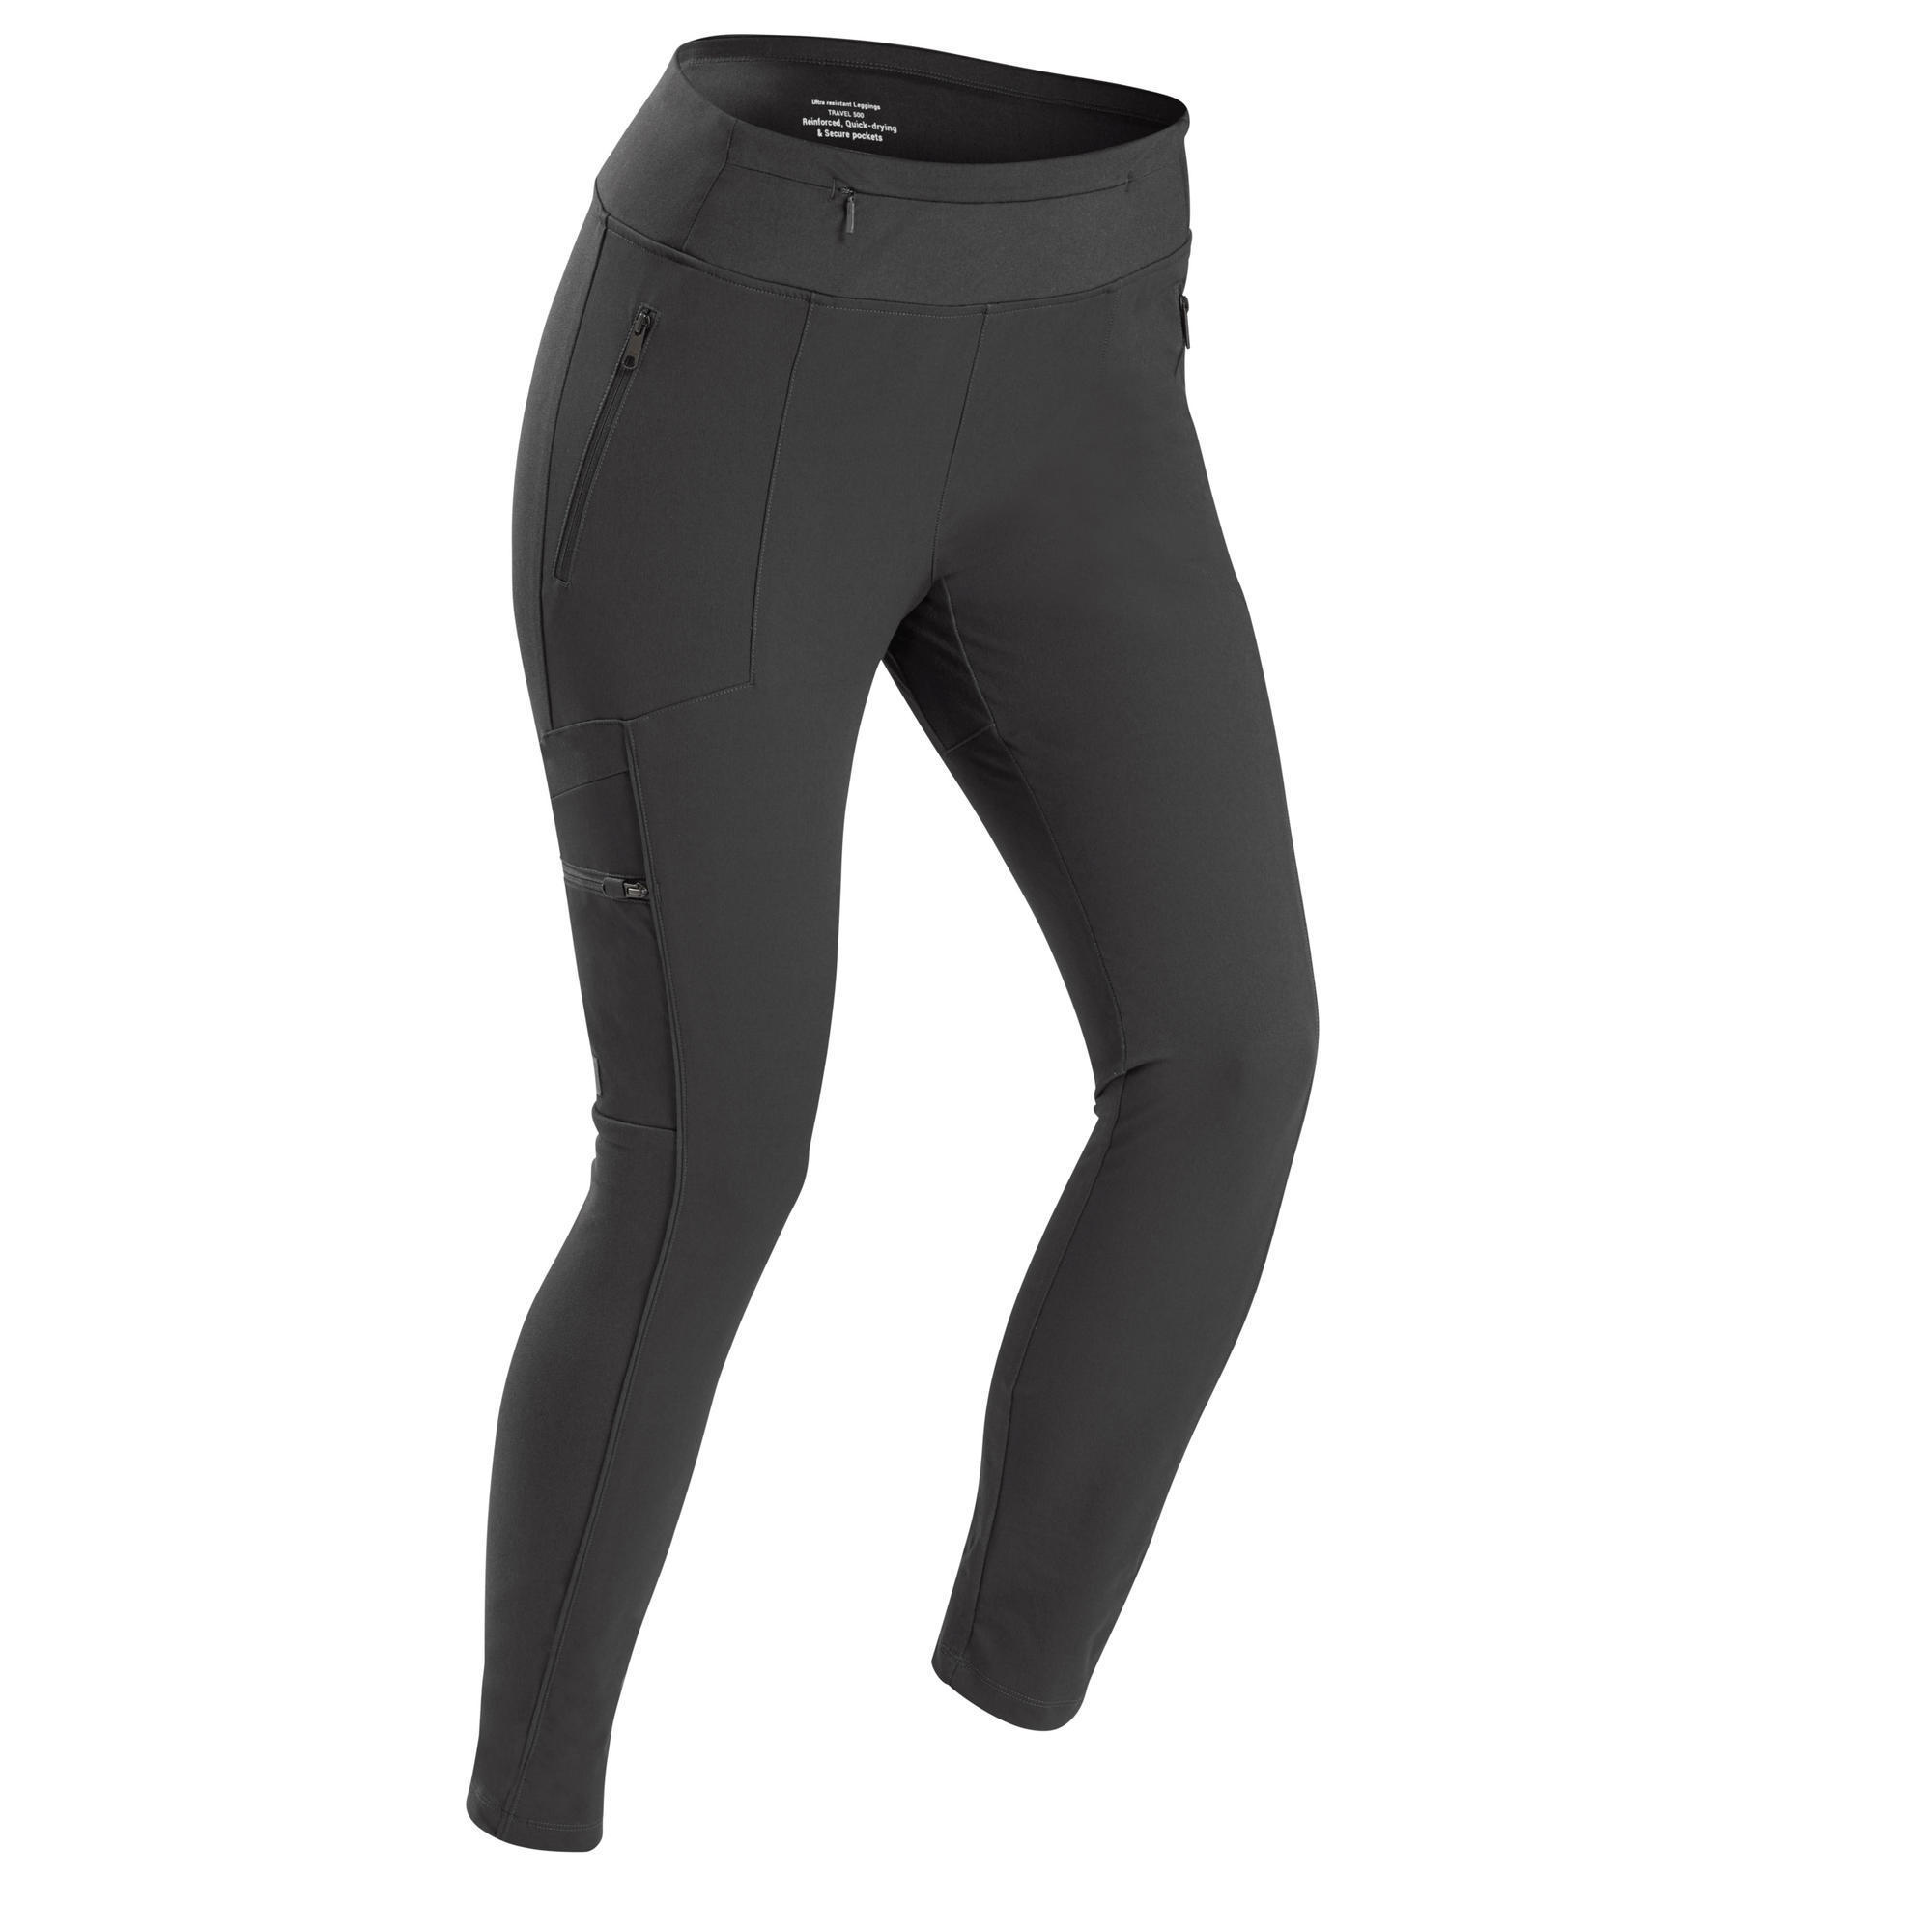 Domyos By Decathlon Women Black Slim Fit High-Rise Easy Wash Maternity  Cigarette Trousers Price in India, Full Specifications & Offers |  DTashion.com